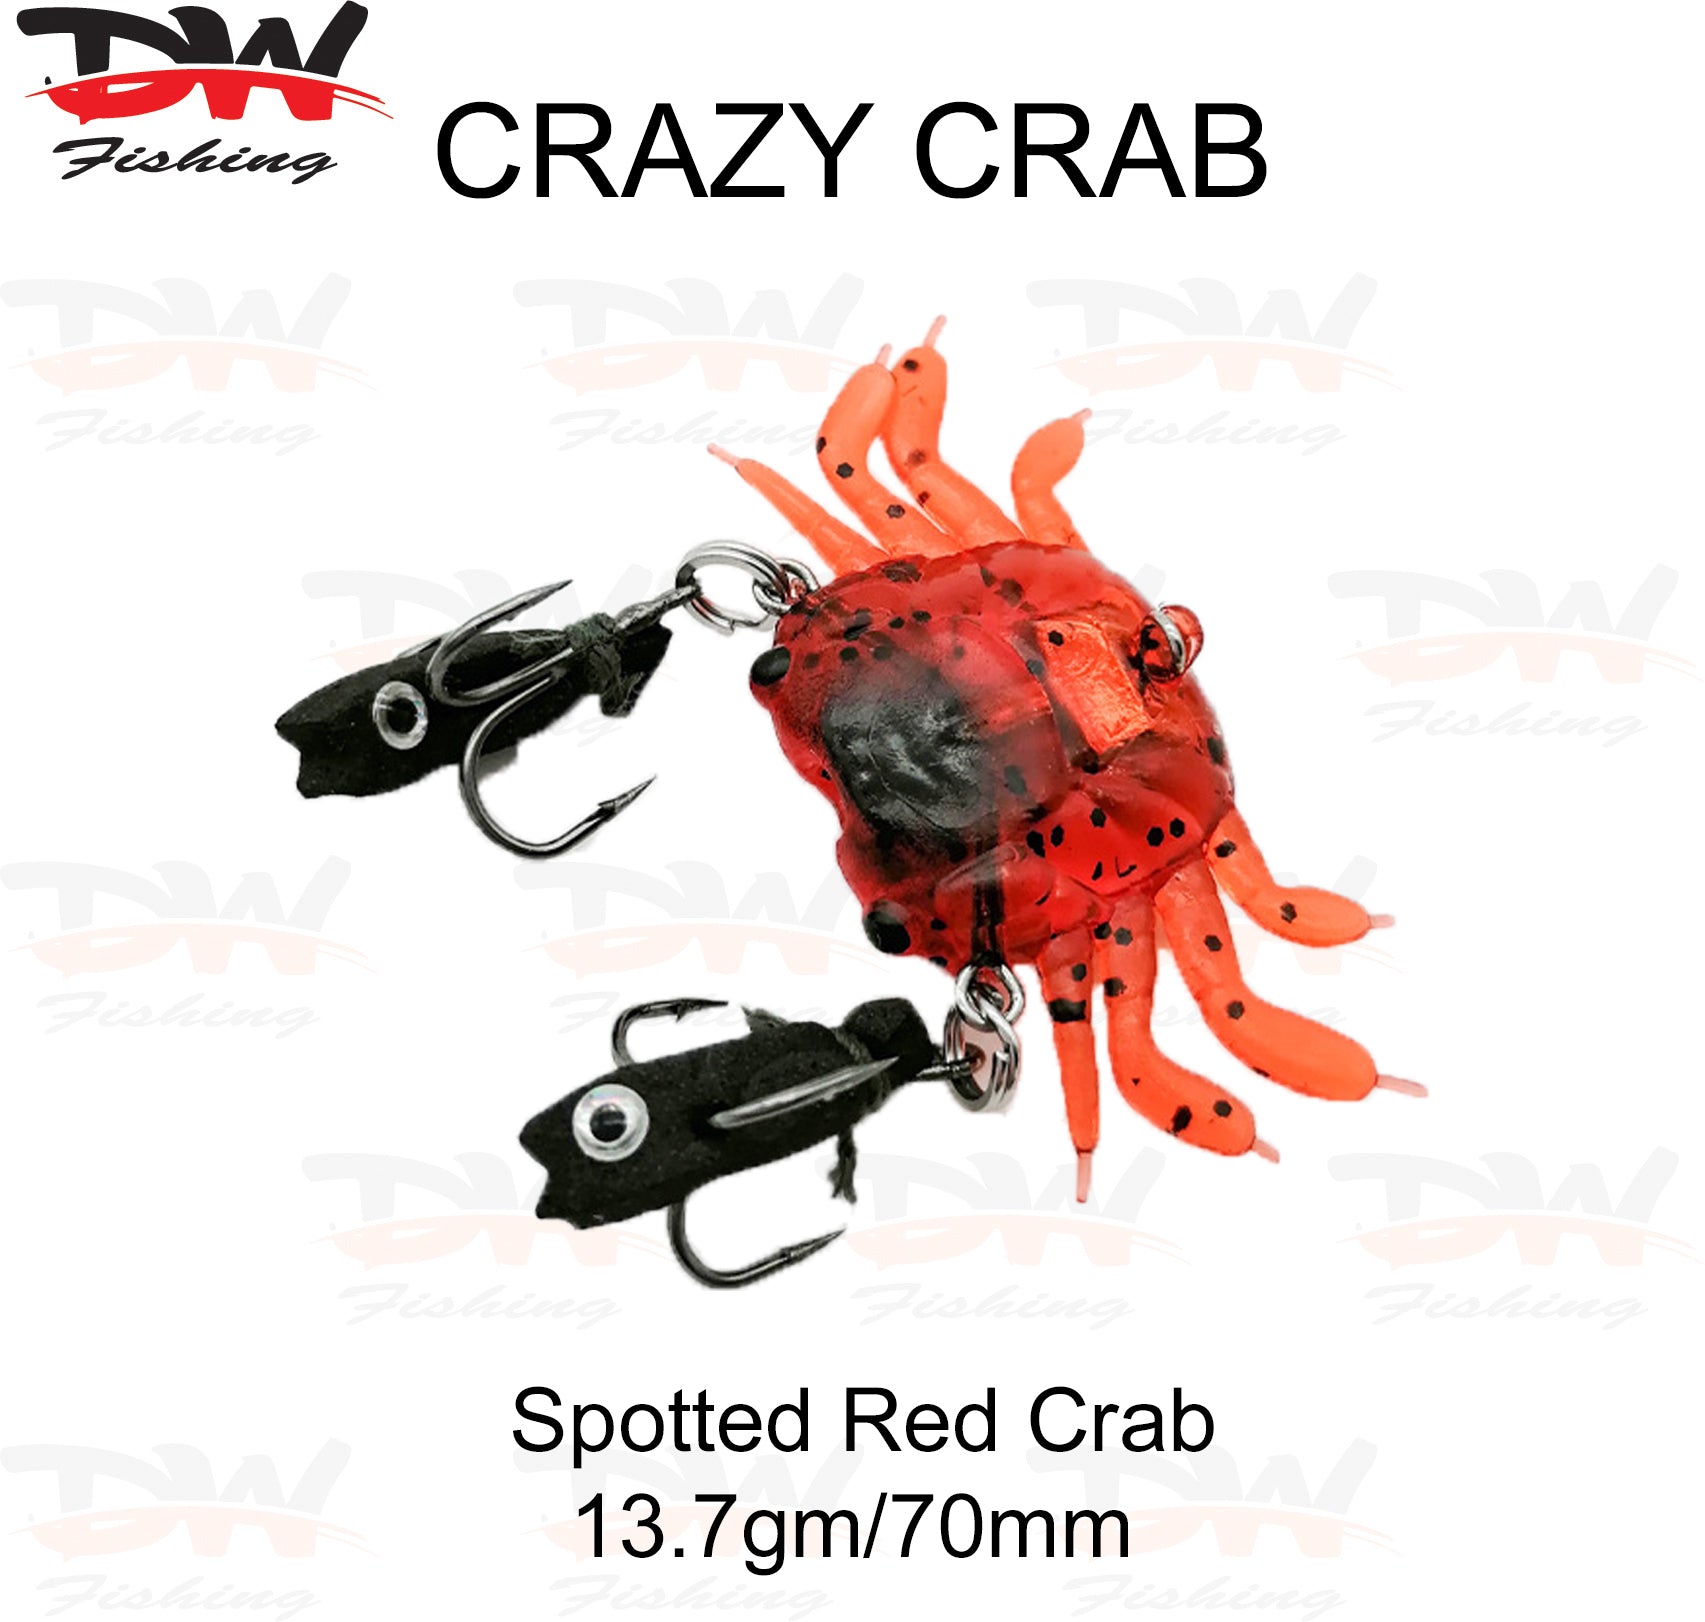 Soft Plastic Crazy Crab 70mm Lure Imitation spotted red crab